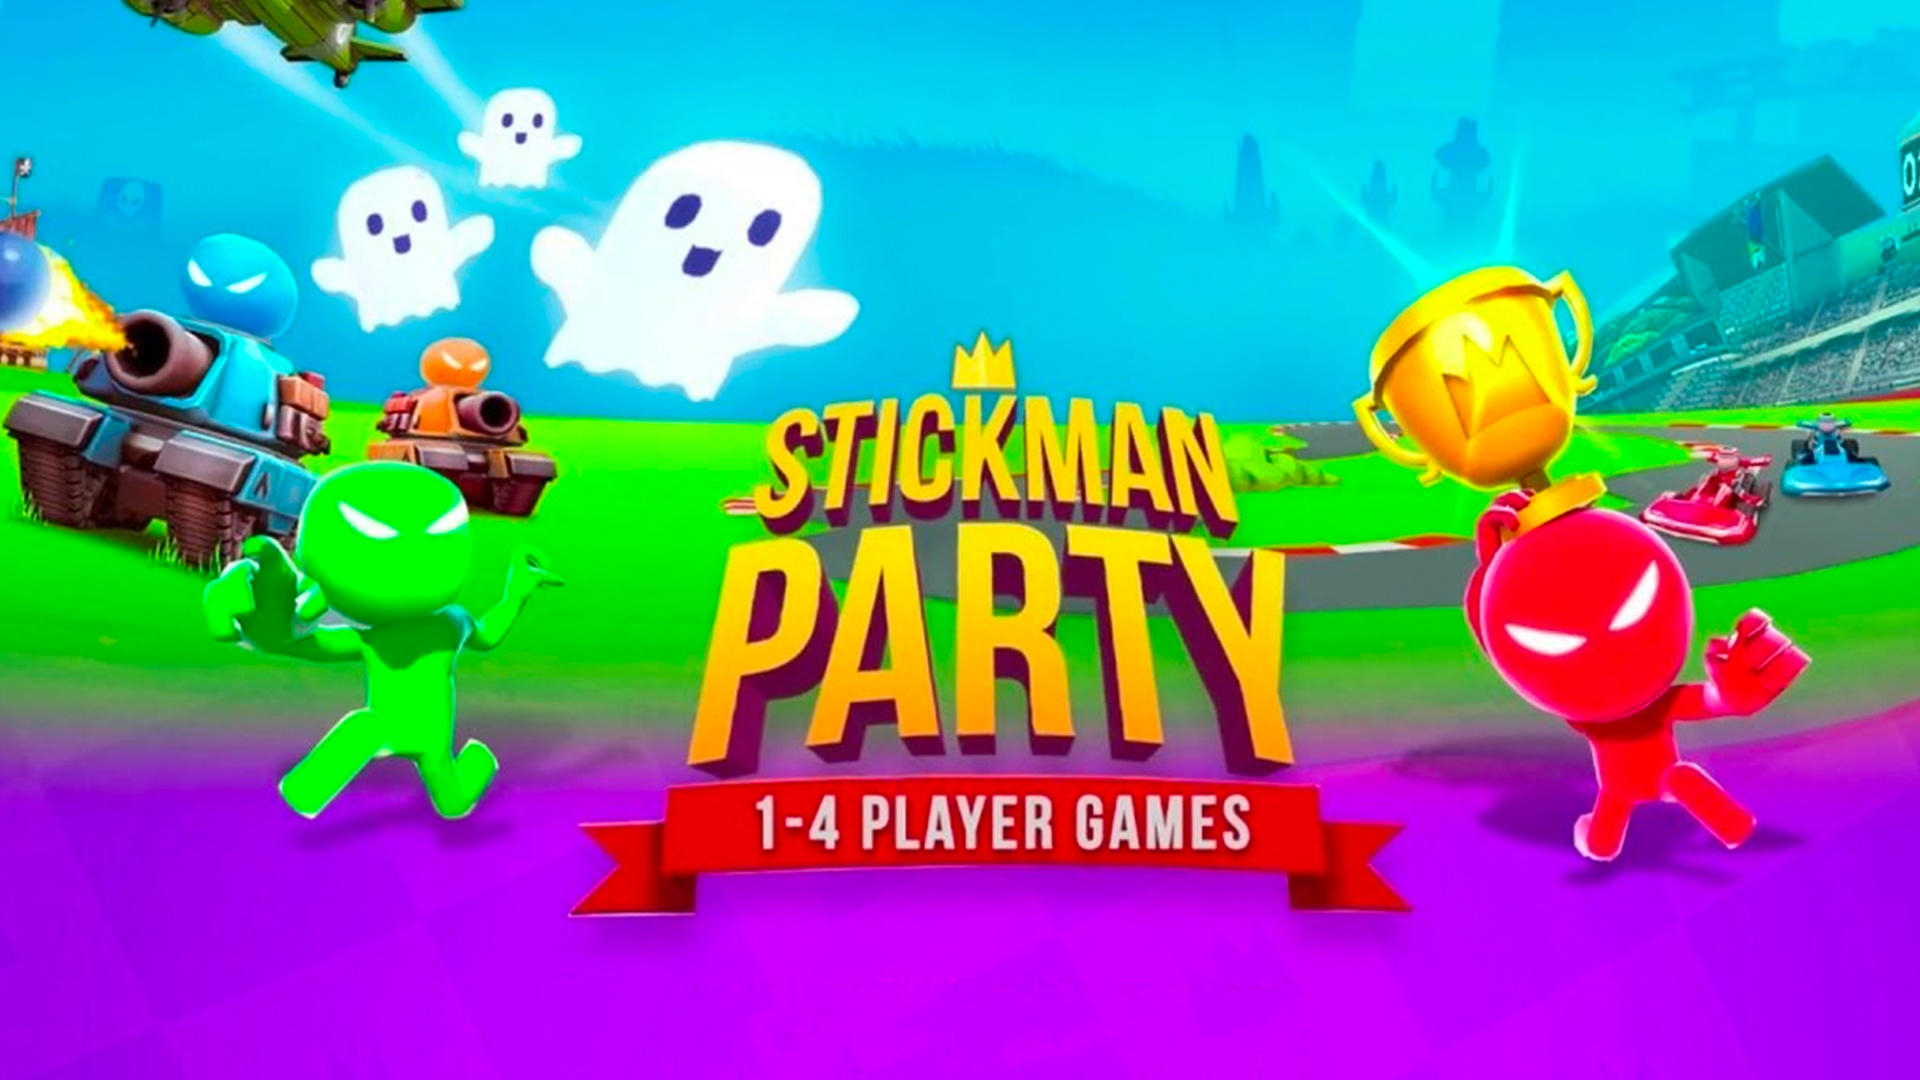 Play Stickman Party 2 3 4 MiniGames Online for Free on PC & Mobile